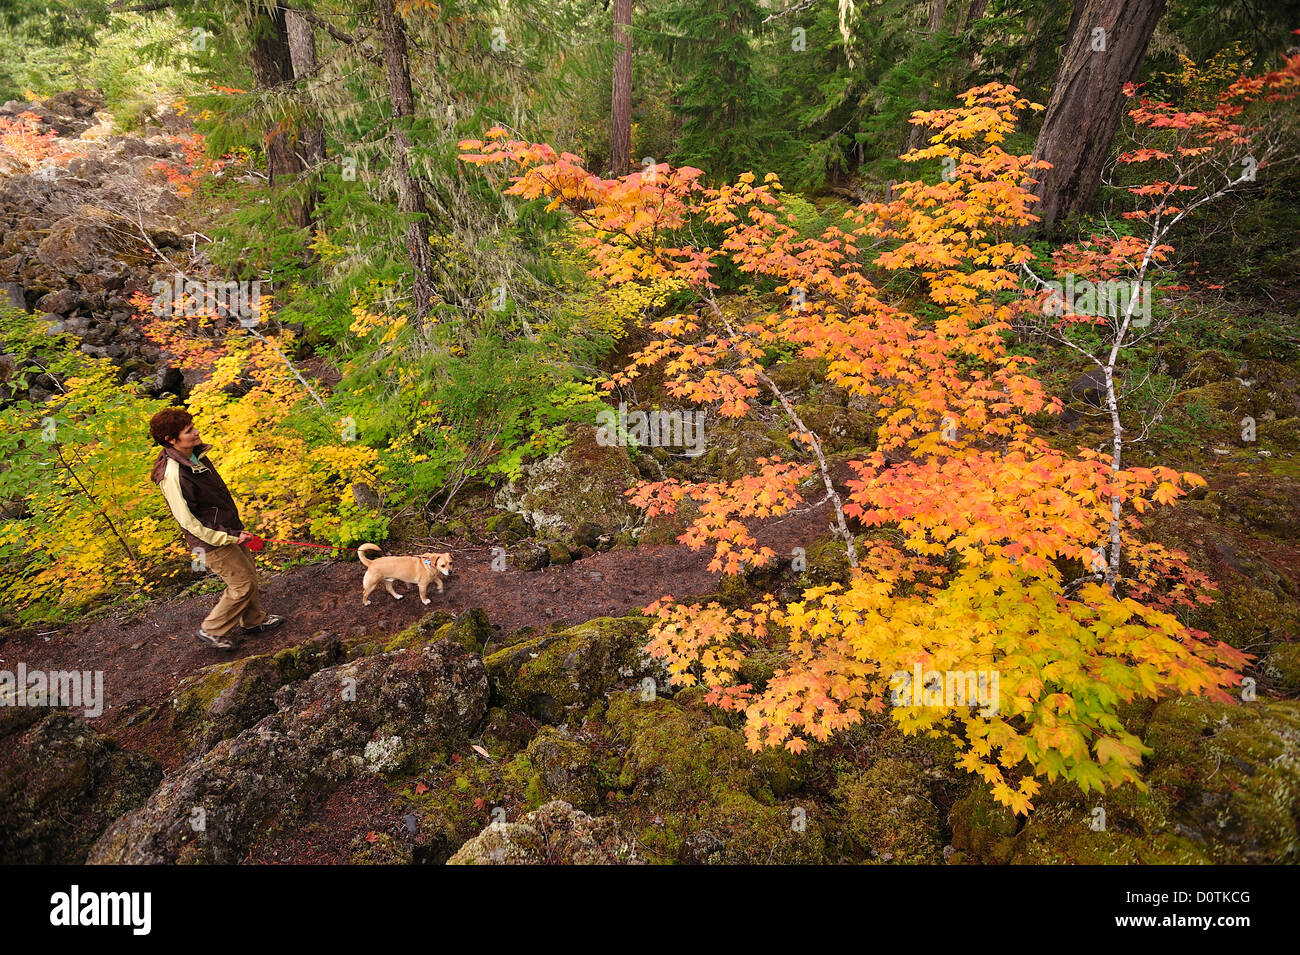 Woman, walking, dog, autum, colors, fall, colorful, leaves, moss, Cascade Mountains, Proxy Falls, Willamette, National Forest, O Stock Photo